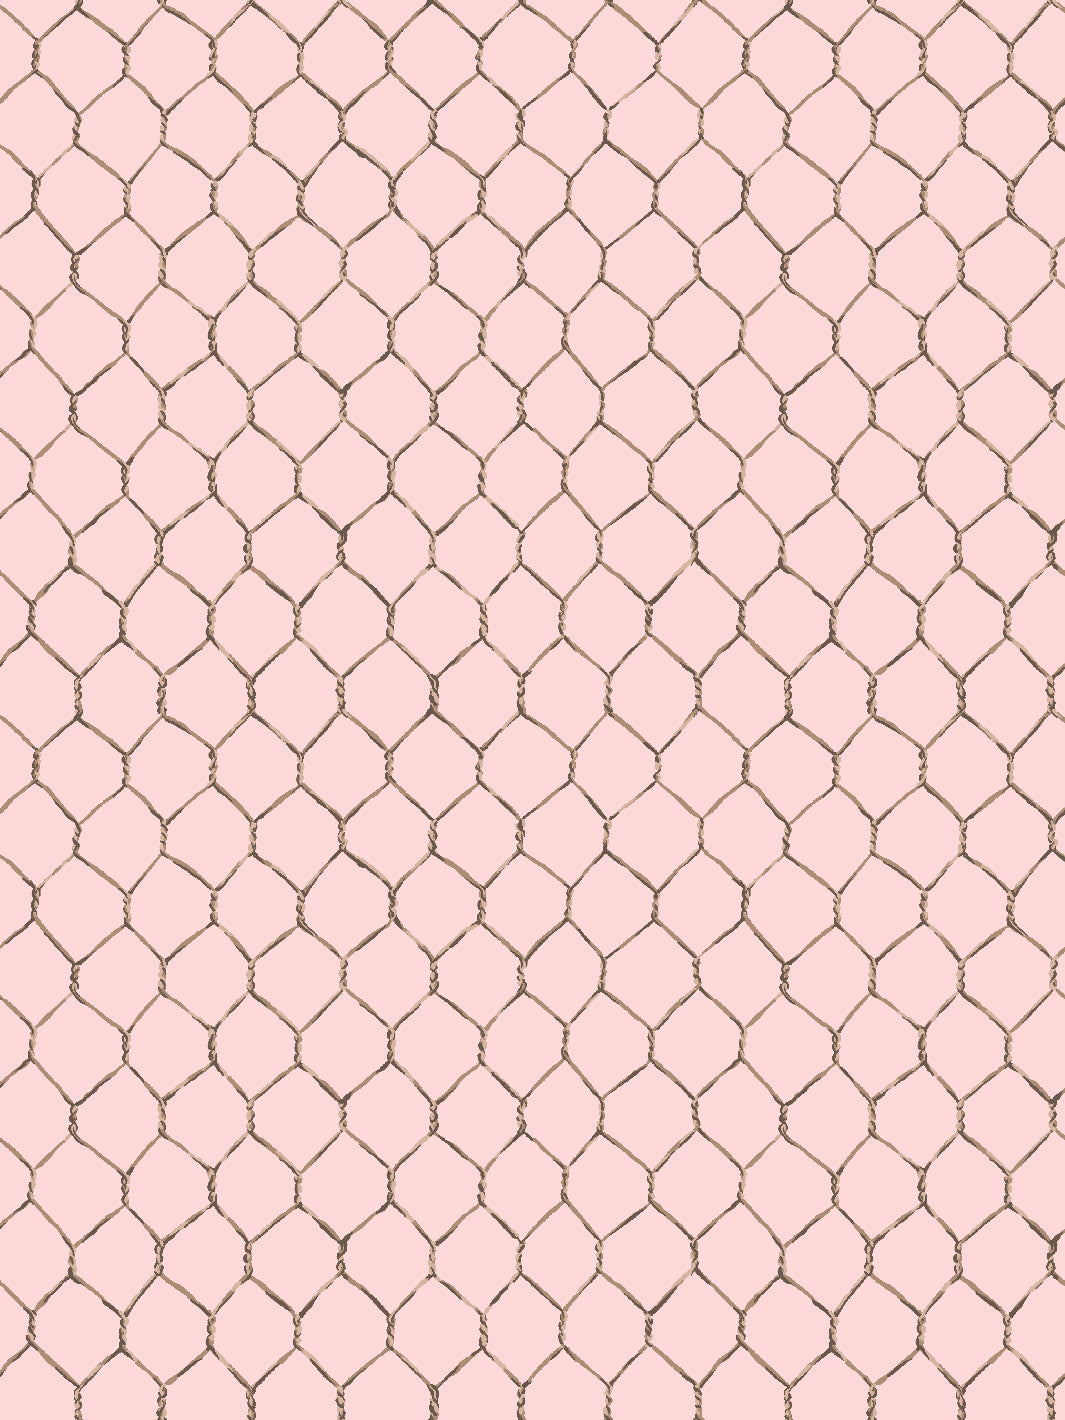 'Evelyn's Chicken Wire' Wallpaper by Sarah Jessica Parker - Sable on Pink